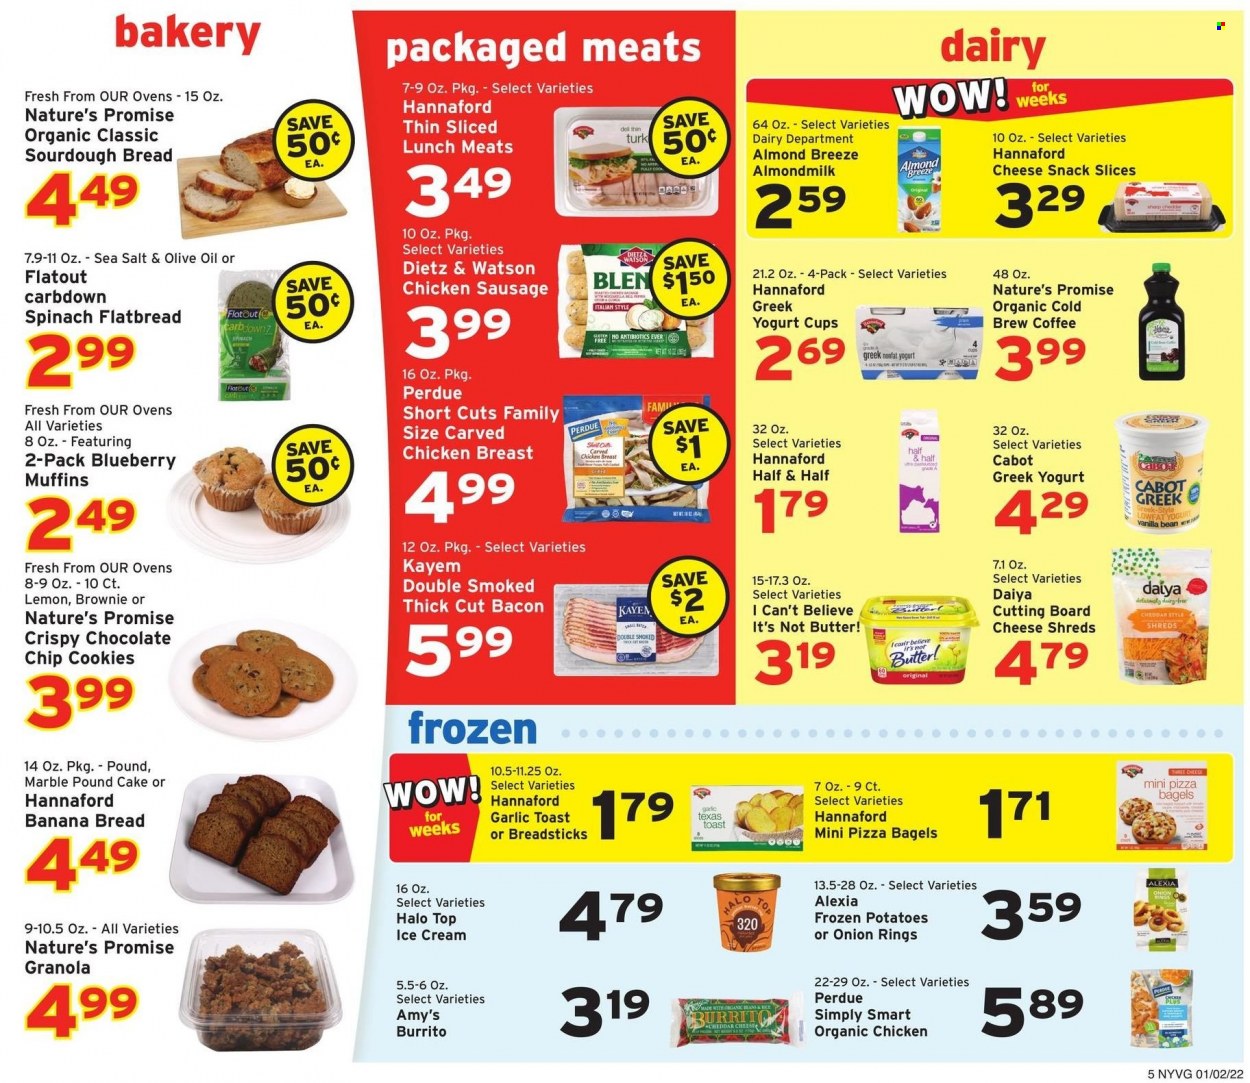 thumbnail - Hannaford Flyer - 01/02/2022 - 01/08/2022 - Sales products - bagels, bread, cake, sourdough bread, Nature’s Promise, flatbread, brownies, muffin, banana bread, pound cake, potatoes, pizza, onion rings, burrito, Perdue®, bacon, Dietz & Watson, sausage, chicken sausage, cheddar, greek yoghurt, yoghurt, almond milk, Almond Breeze, butter, I Can't Believe It's Not Butter, ice cream, cookies, snack, bread sticks, sea salt, granola, olive oil, coffee, cutting board, Half and half. Page 5.